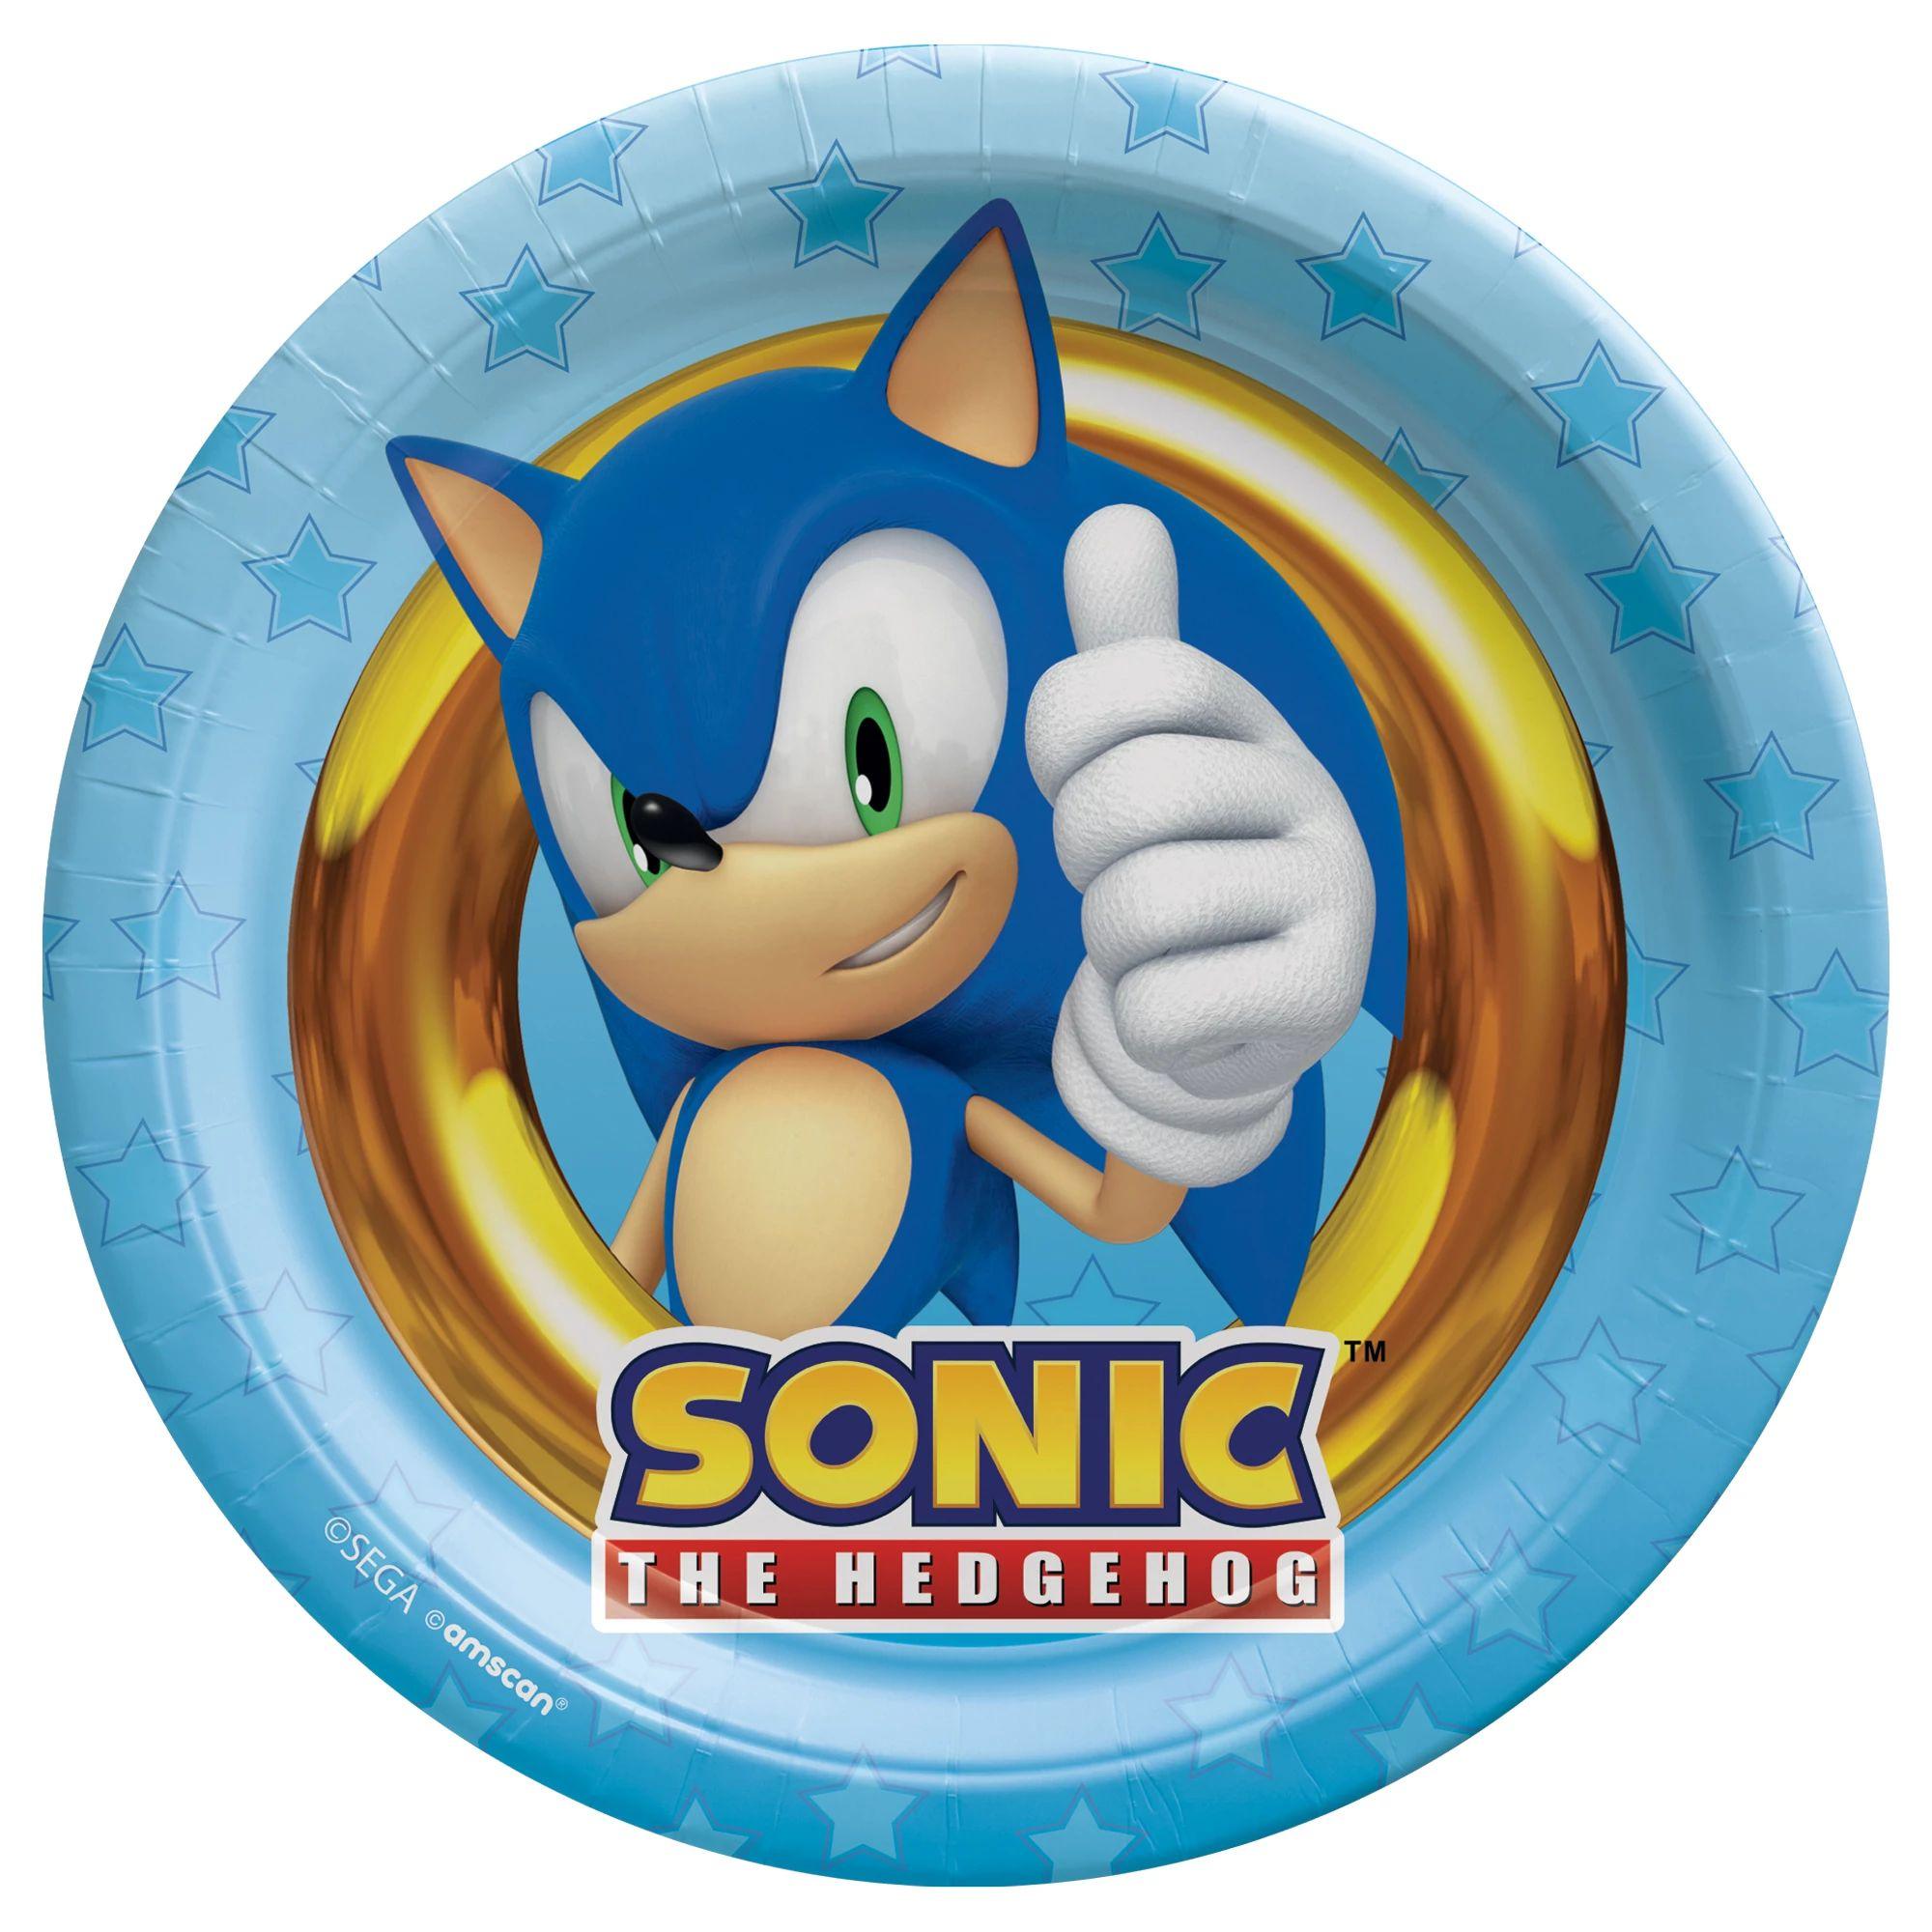 Sonic Party Supplies,Sonic Birthday Party Balloons,sonic